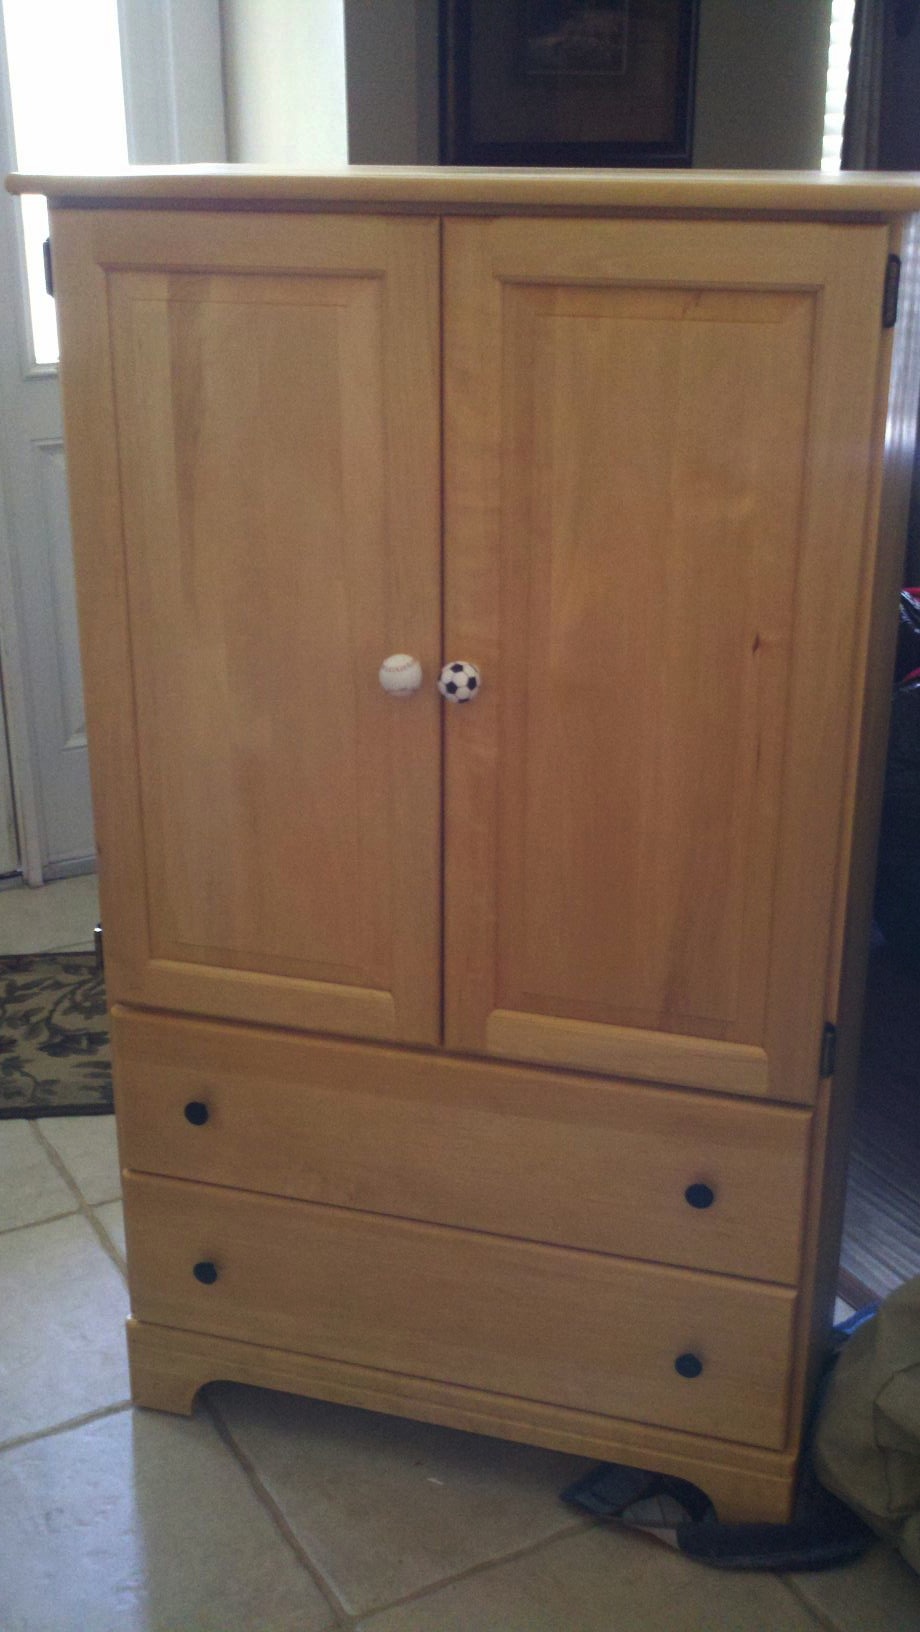 Dresser and armoire